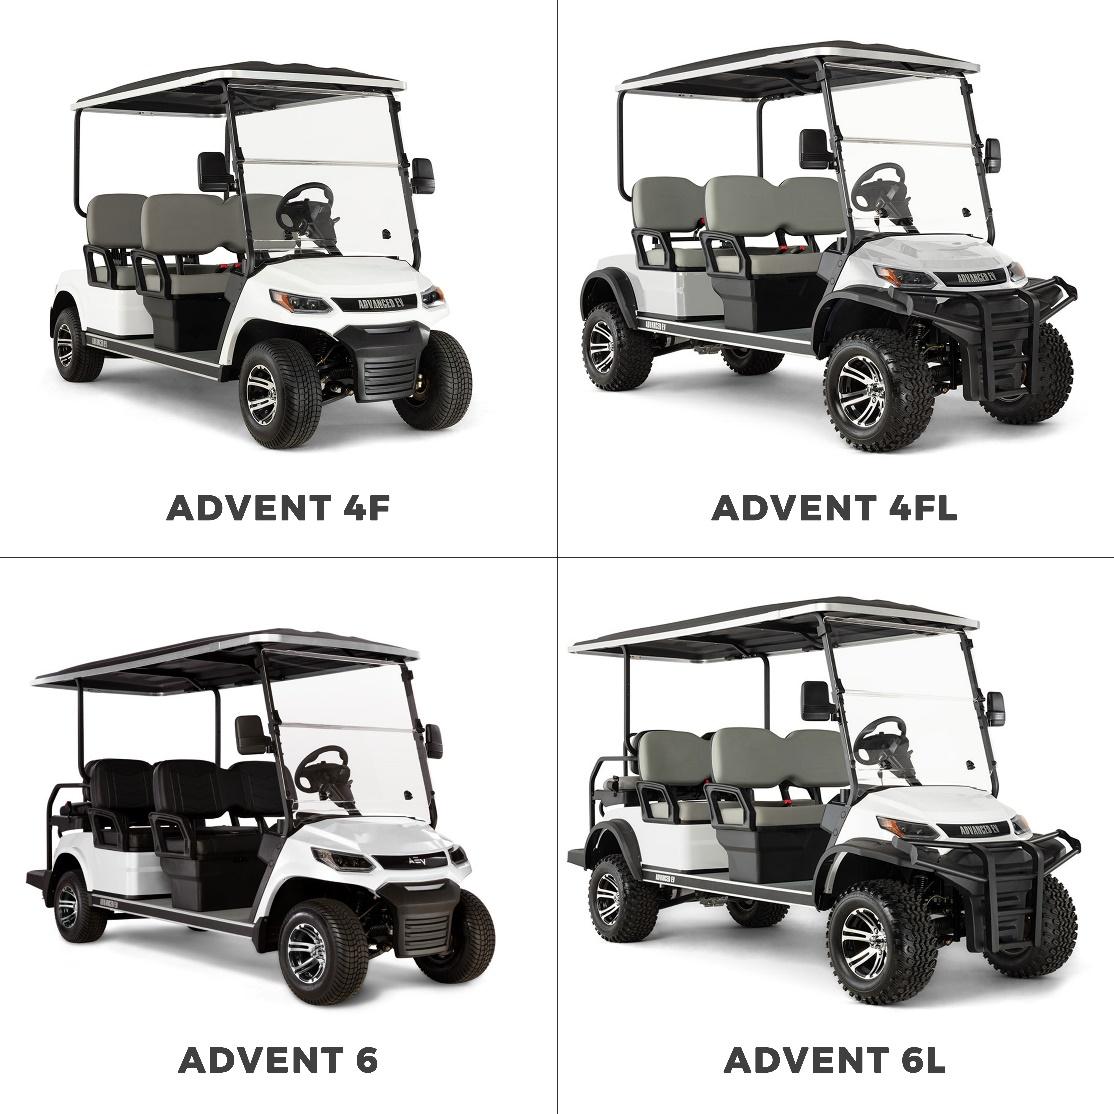 Recalled Advent 4F, Advent 4FL, Advent 6 and Advent 6L Golf Carts